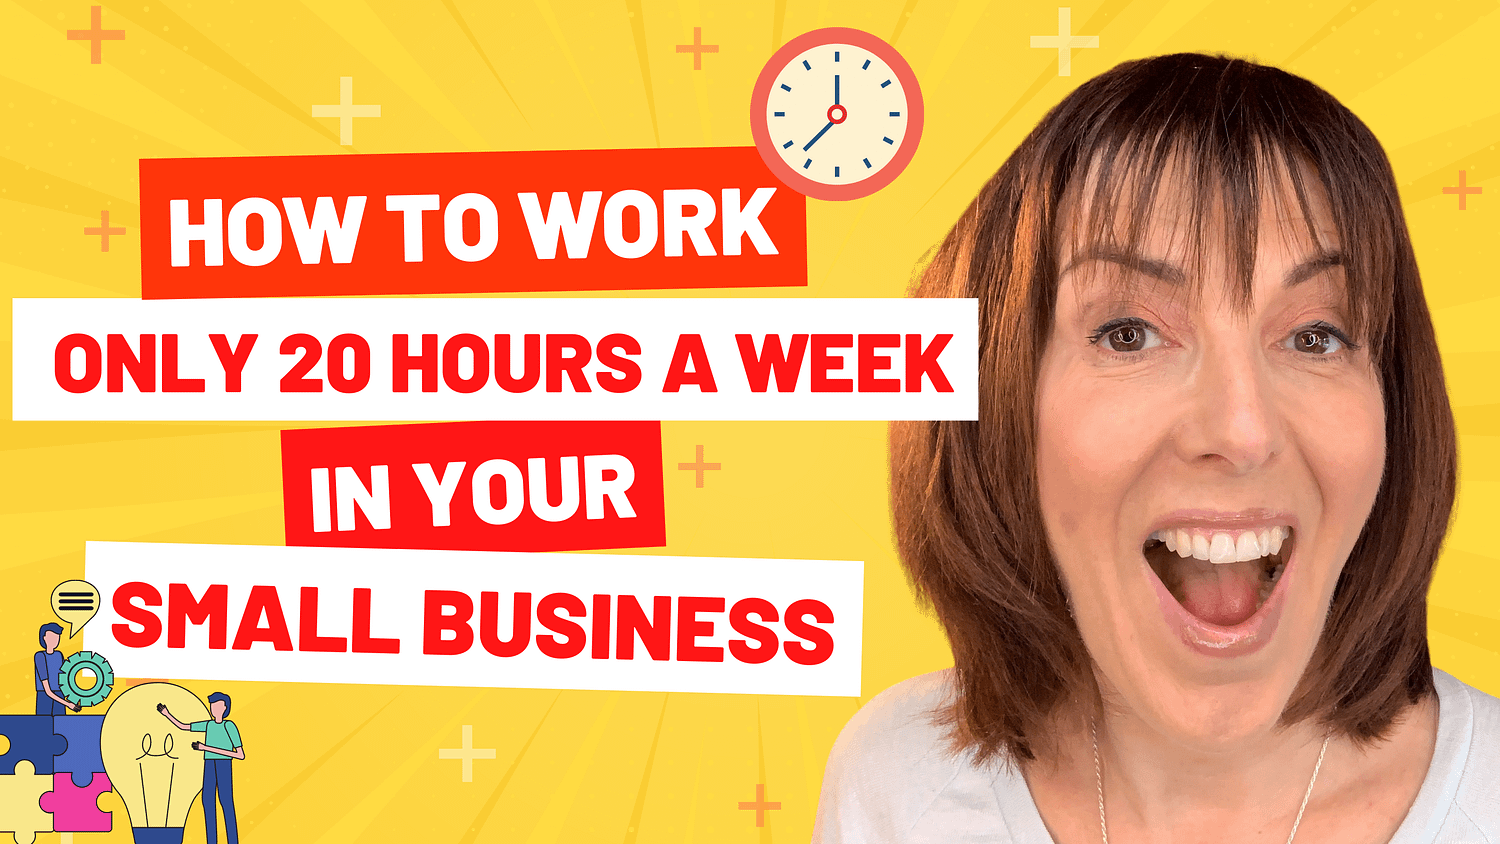 How To Work Only 20 Hours A Week In Your Small Business